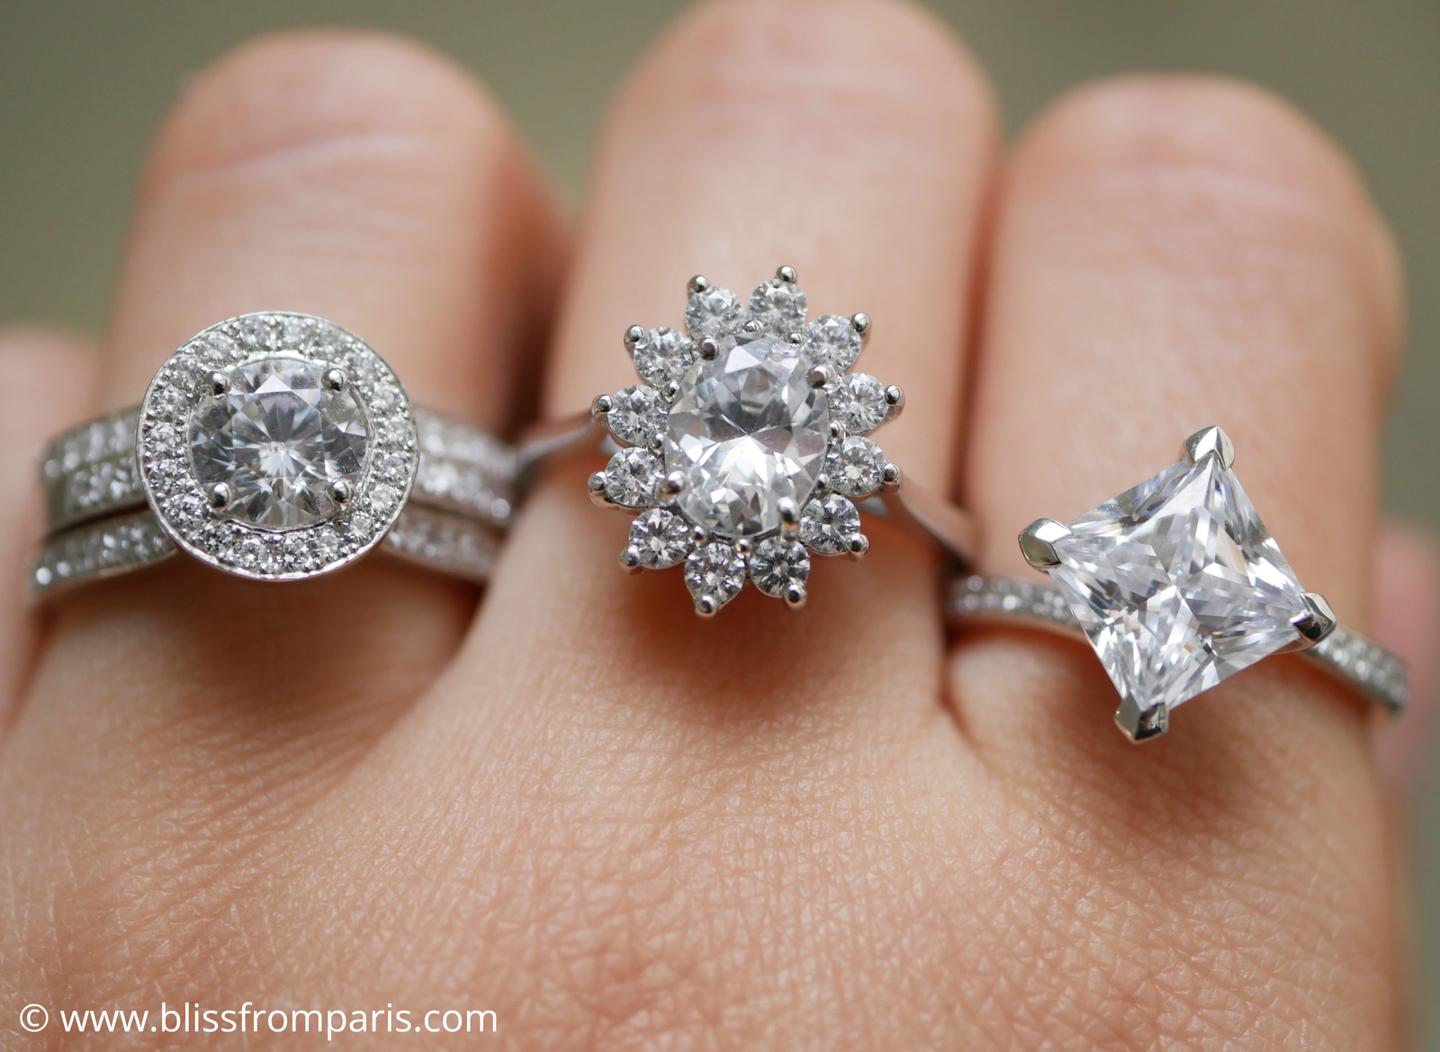 Wearing Engagement Ring On Middle Finger? The Significance of Which Finger You Wear It On